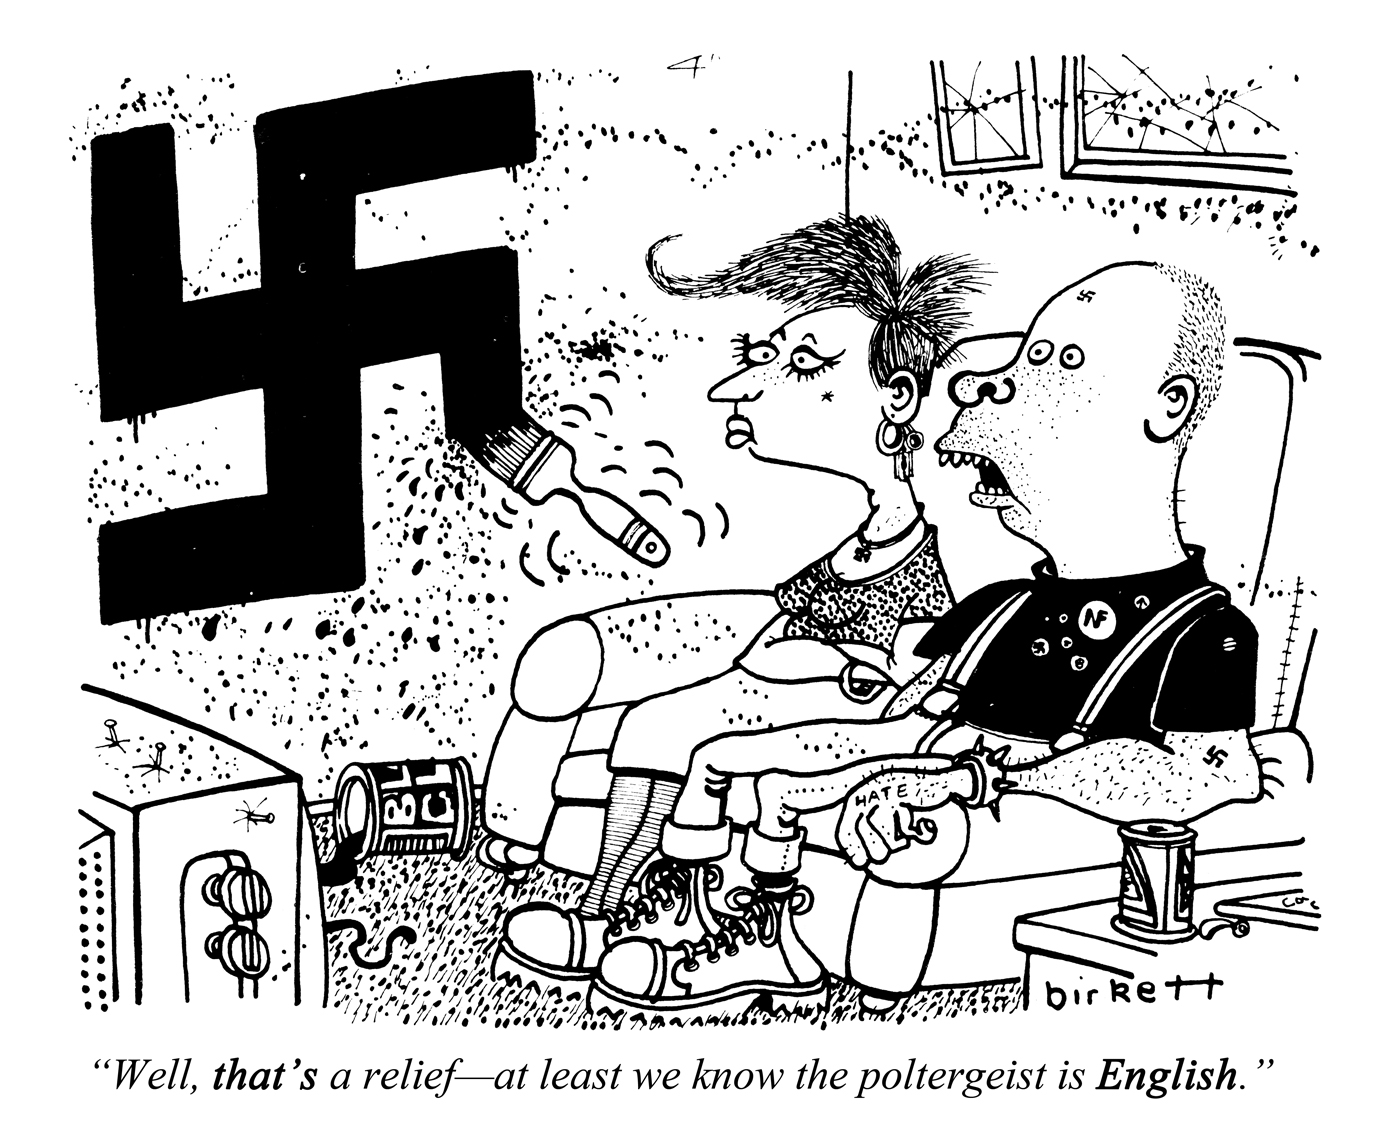 "Well, that's a relief - at least we know the poltergeist is English." Punch 27 April 1983. By Peter Birkett © Punch Ltd